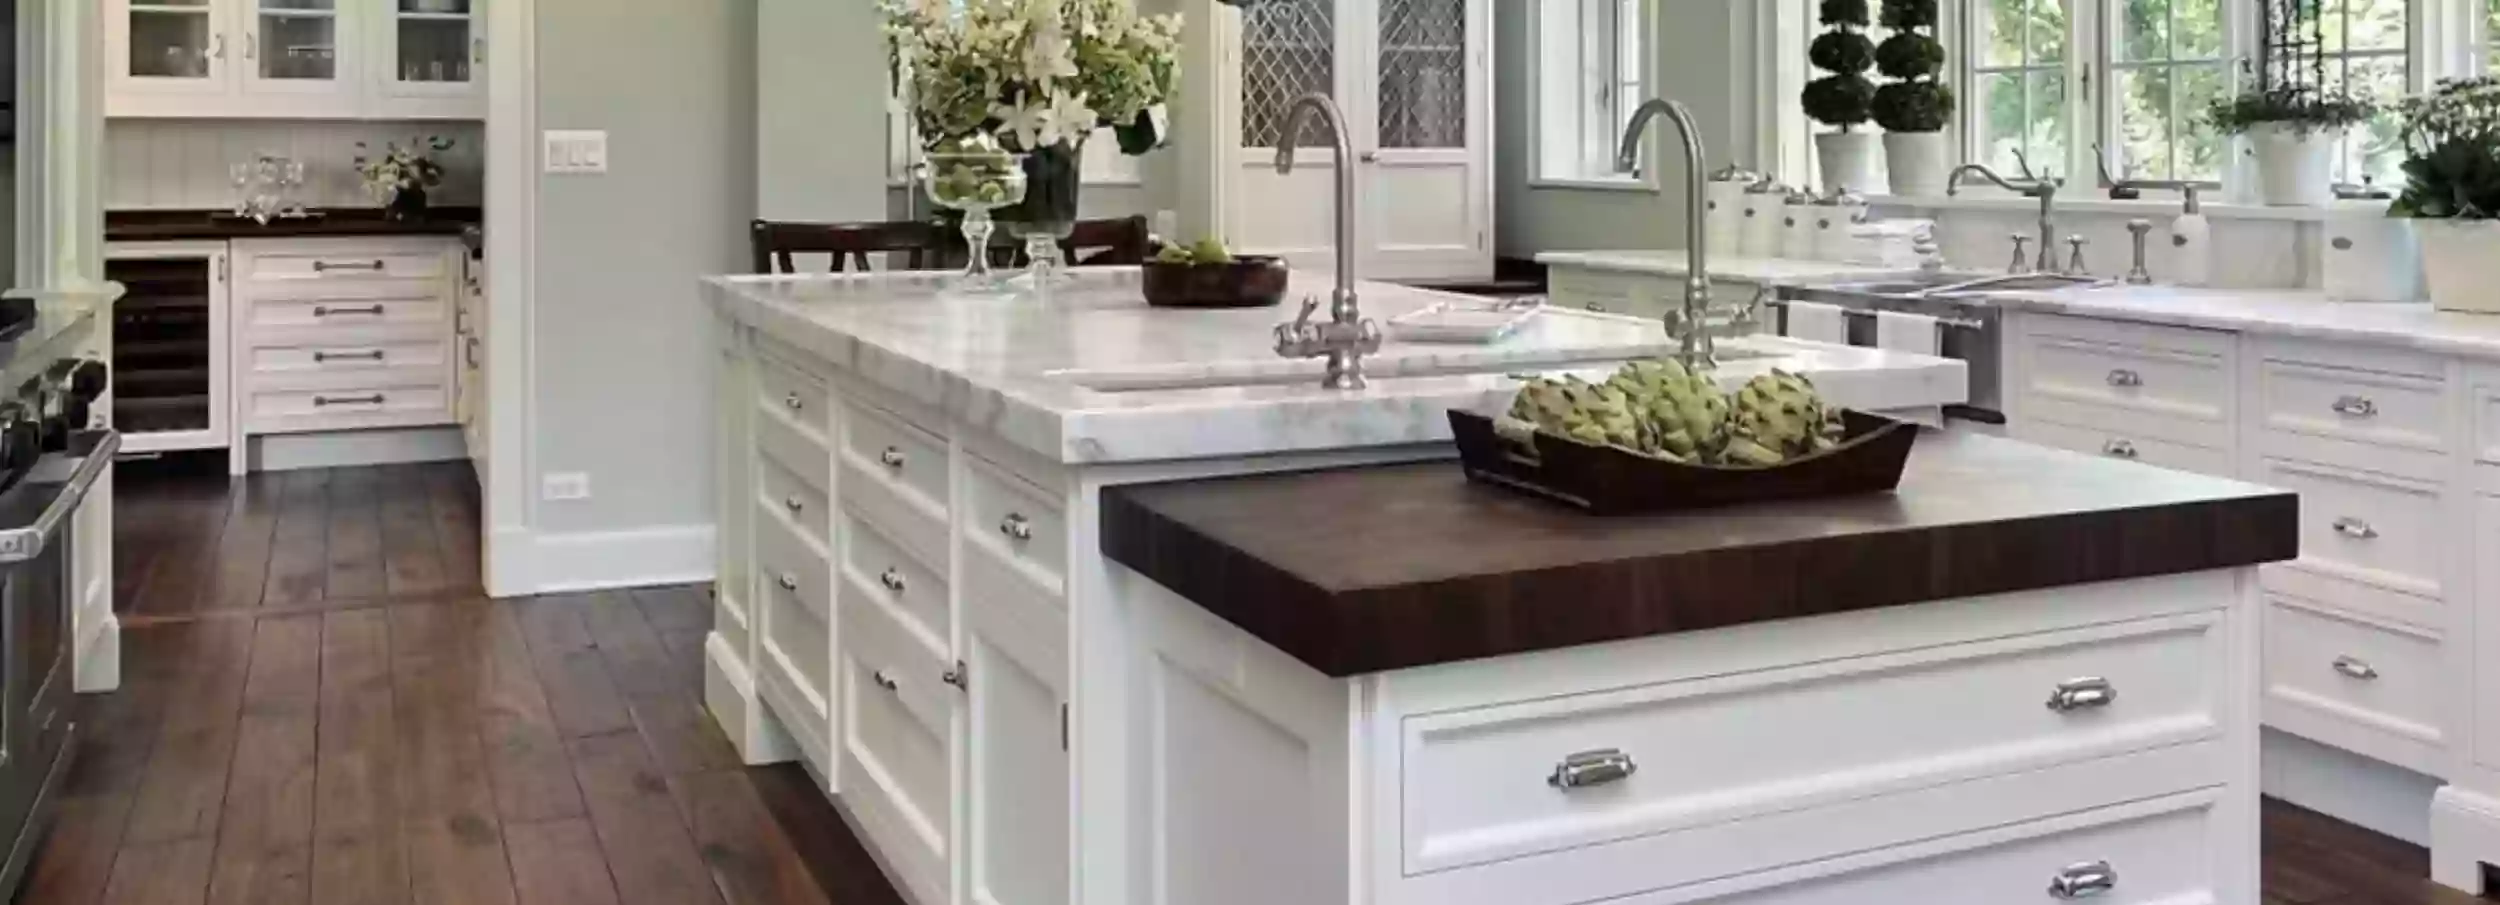 A kitchen painted in white with dark countertops.